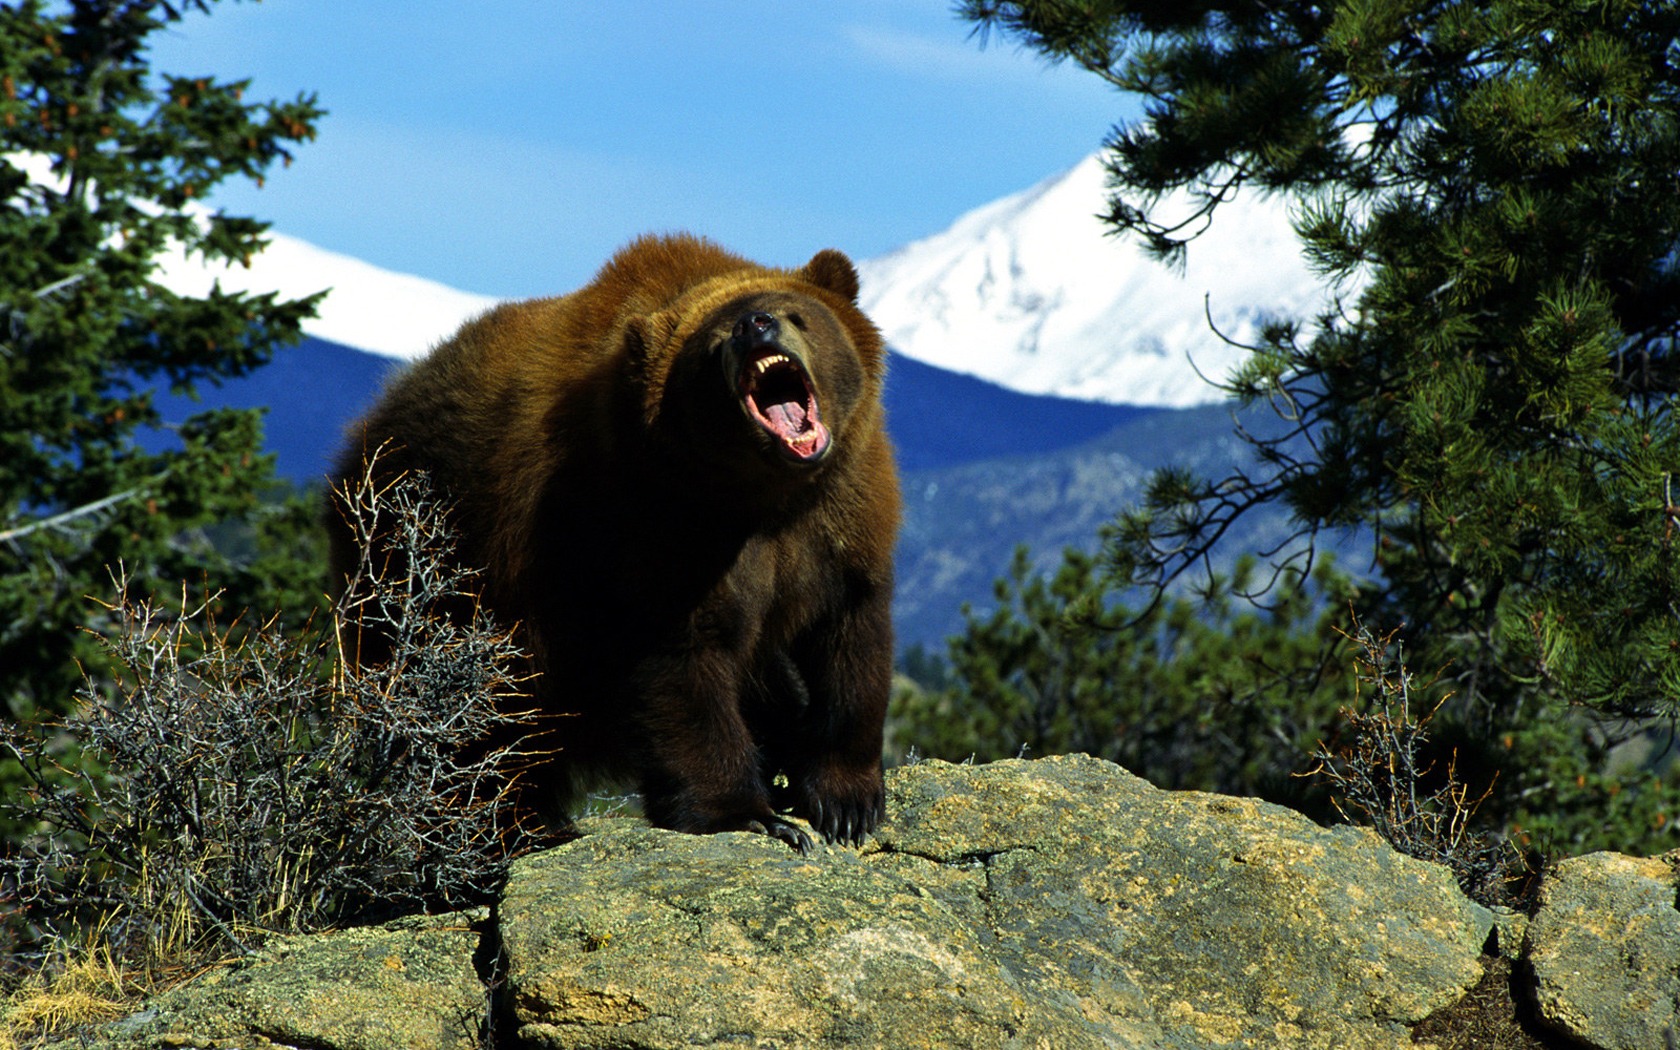 Angry Bear Wallpaper Bears Animals Wallpaper in jpg format for free download